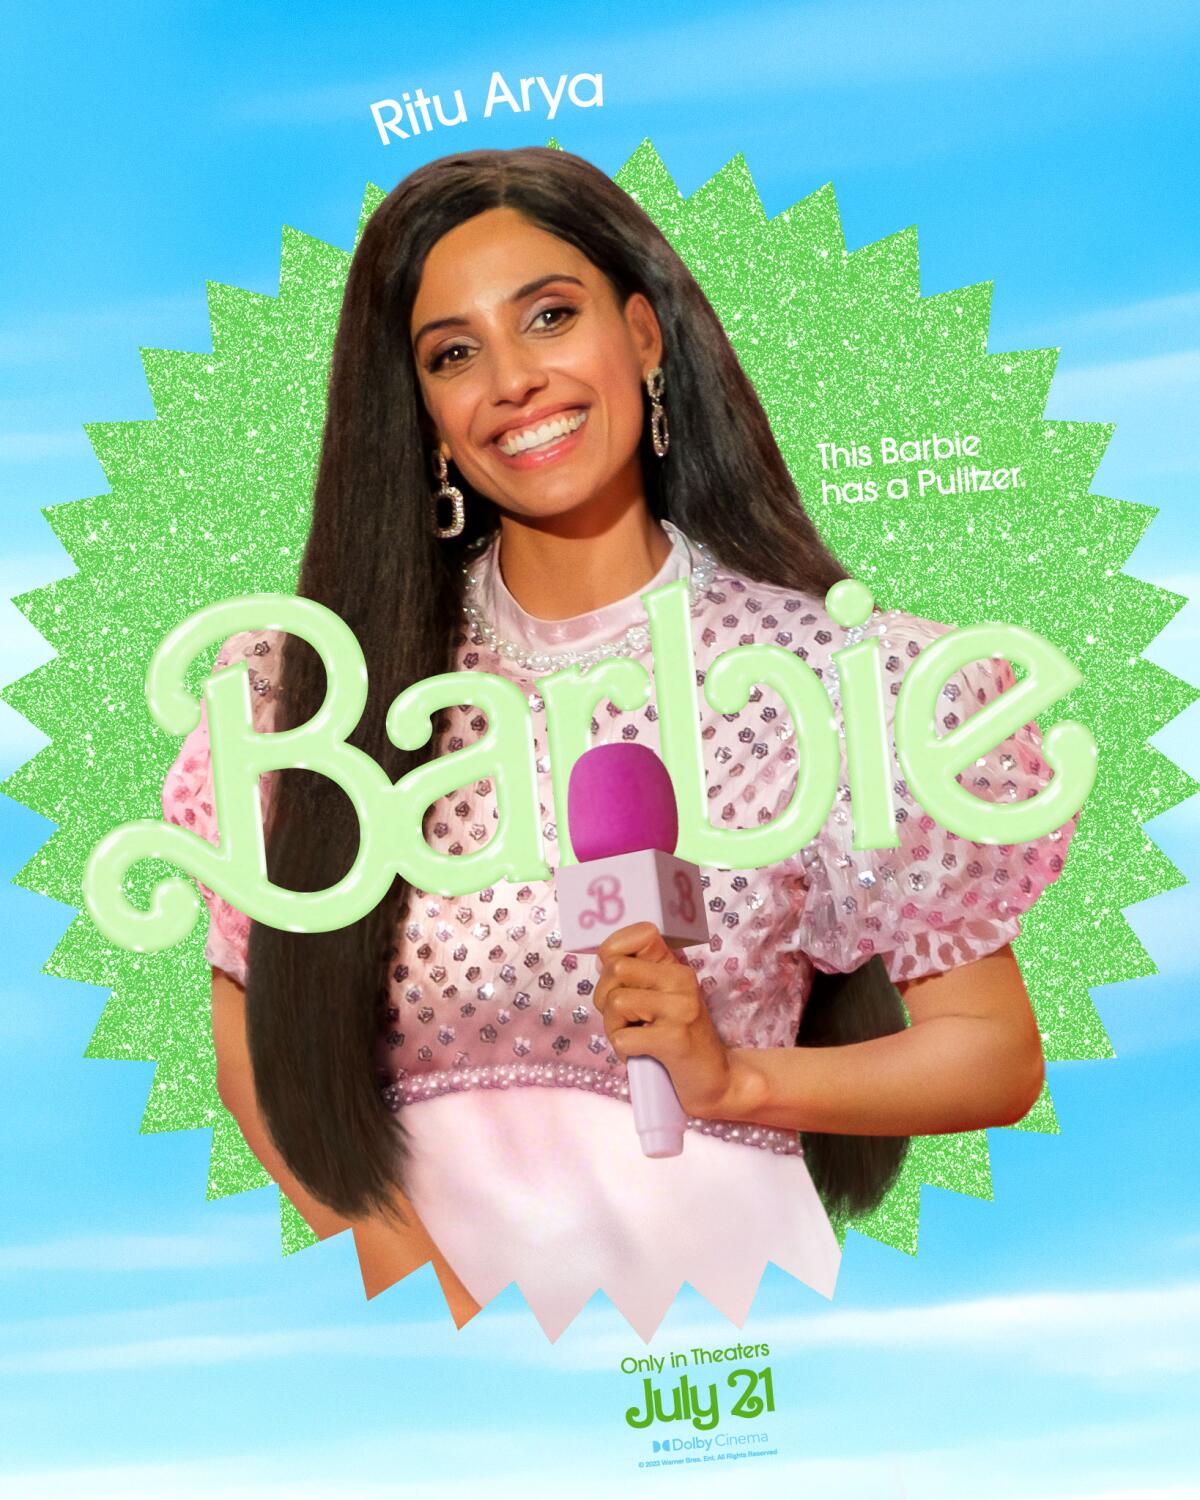 Ritu Arya smiles and holds a pink microphone in a "Barbie" movie poster. She wears a bedazzled pink dress.